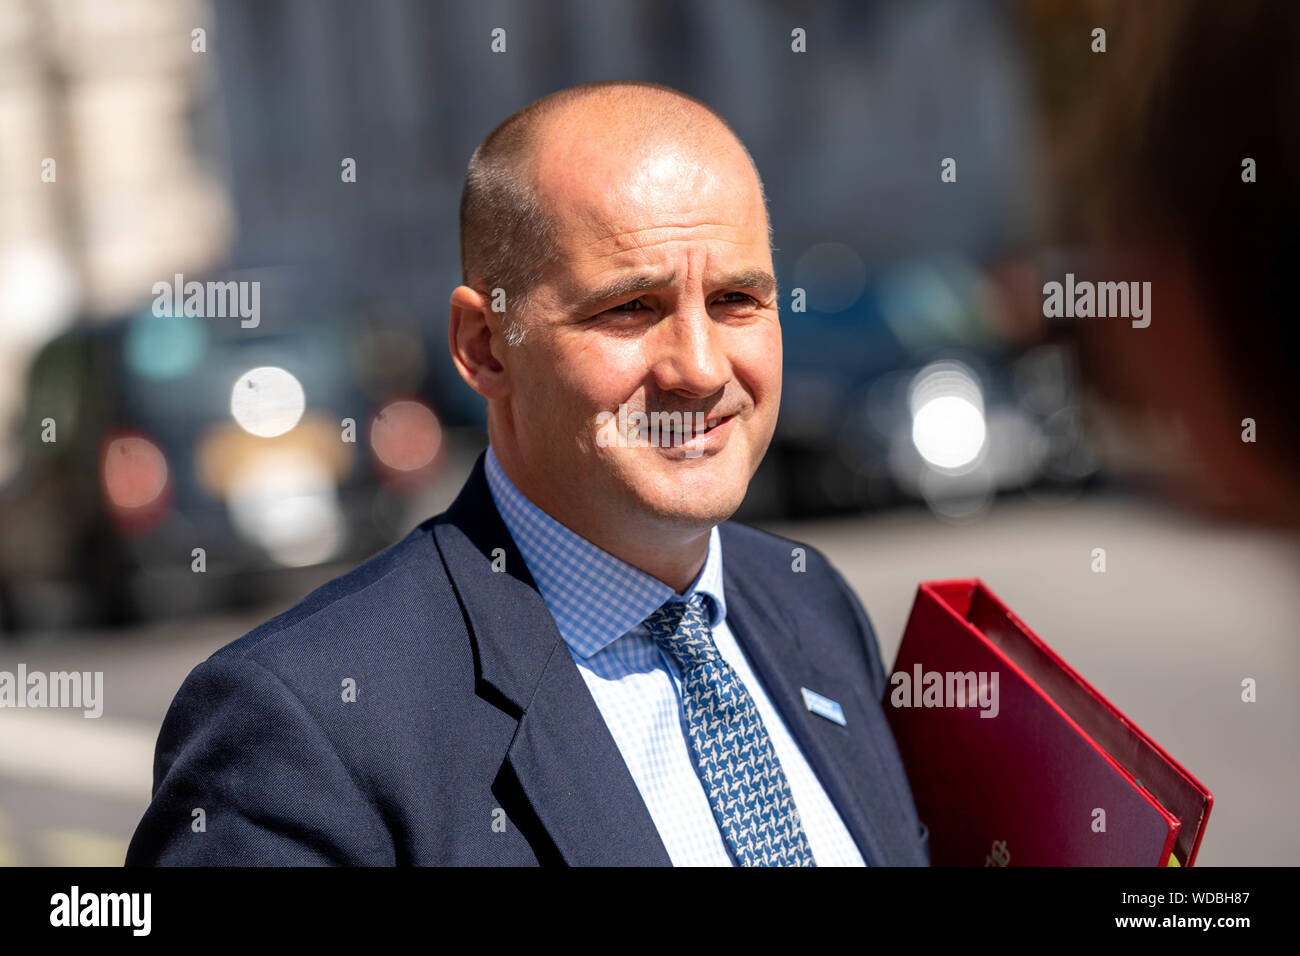 London 29th August 2019 Jake Berry, Northern Powerhouse minister leaves the cabient office after a Brexit meeting Credit: Ian Davidson/Alamy Live News Stock Photo